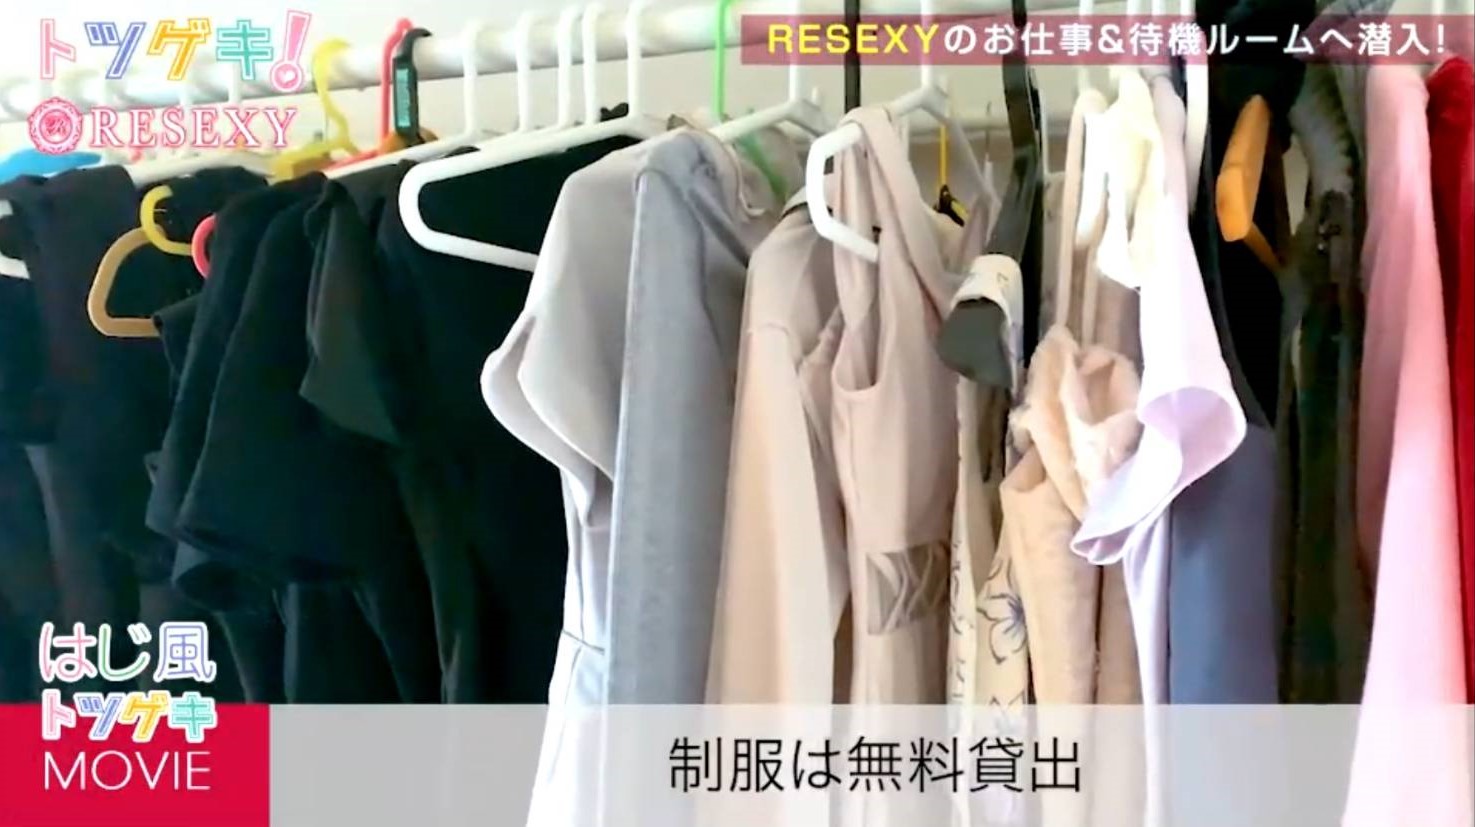 RESEXY金山（リゼクシー）の求人情報画像3